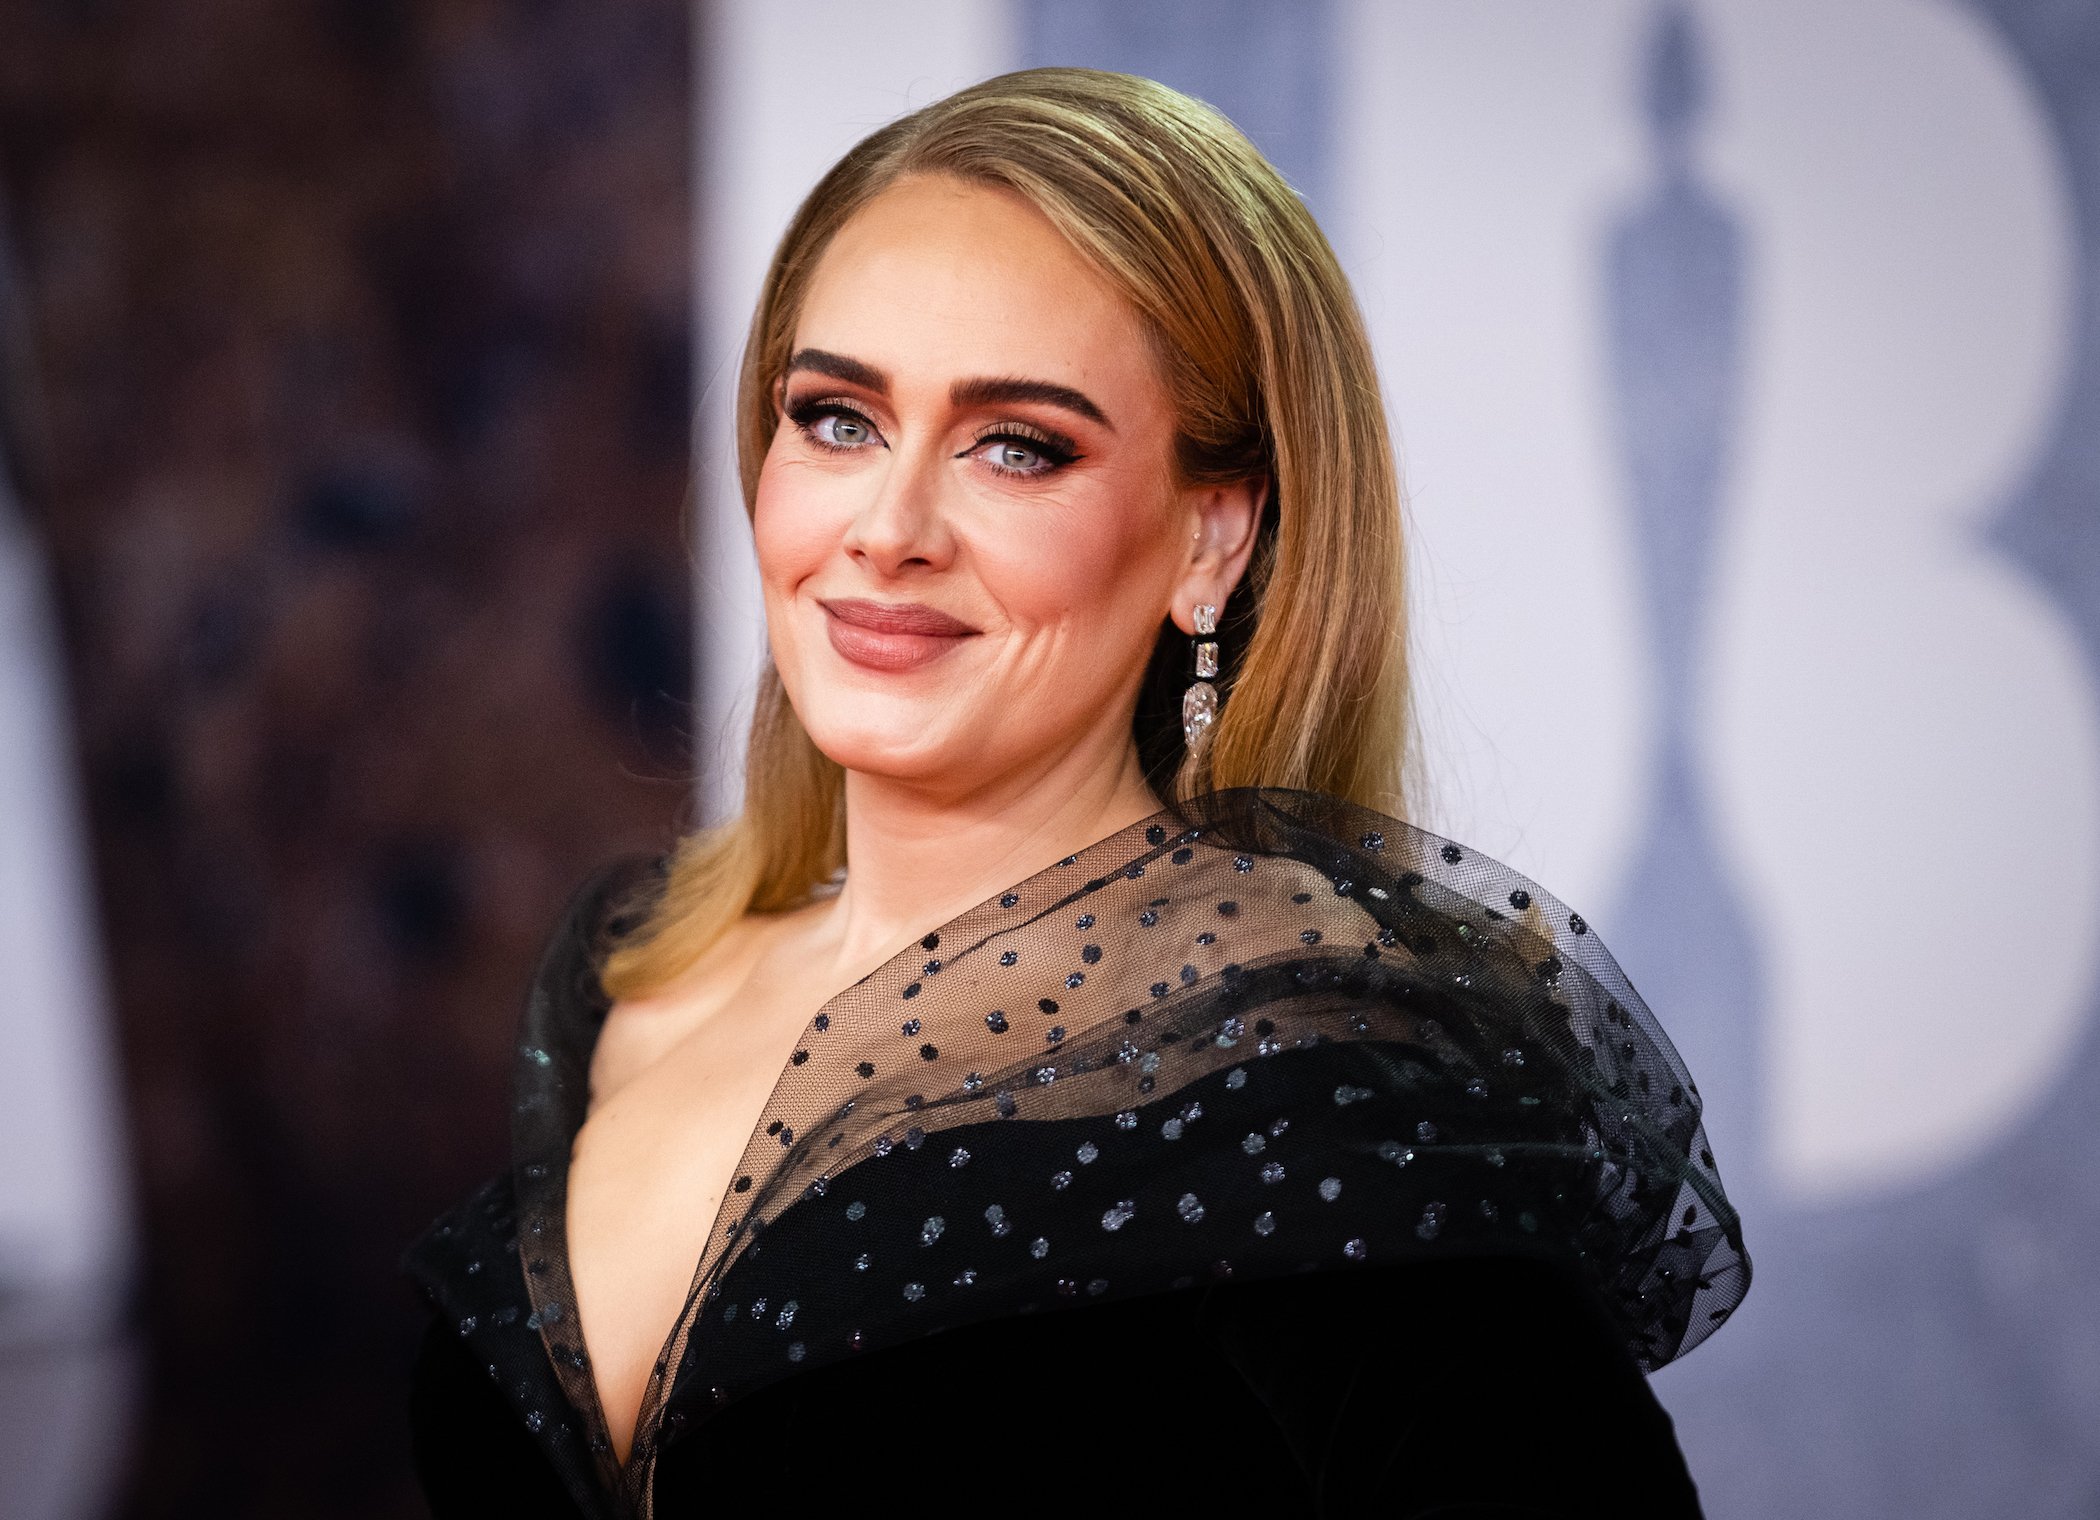 Adele in a black dress smiling at the camera at an awards ceremony